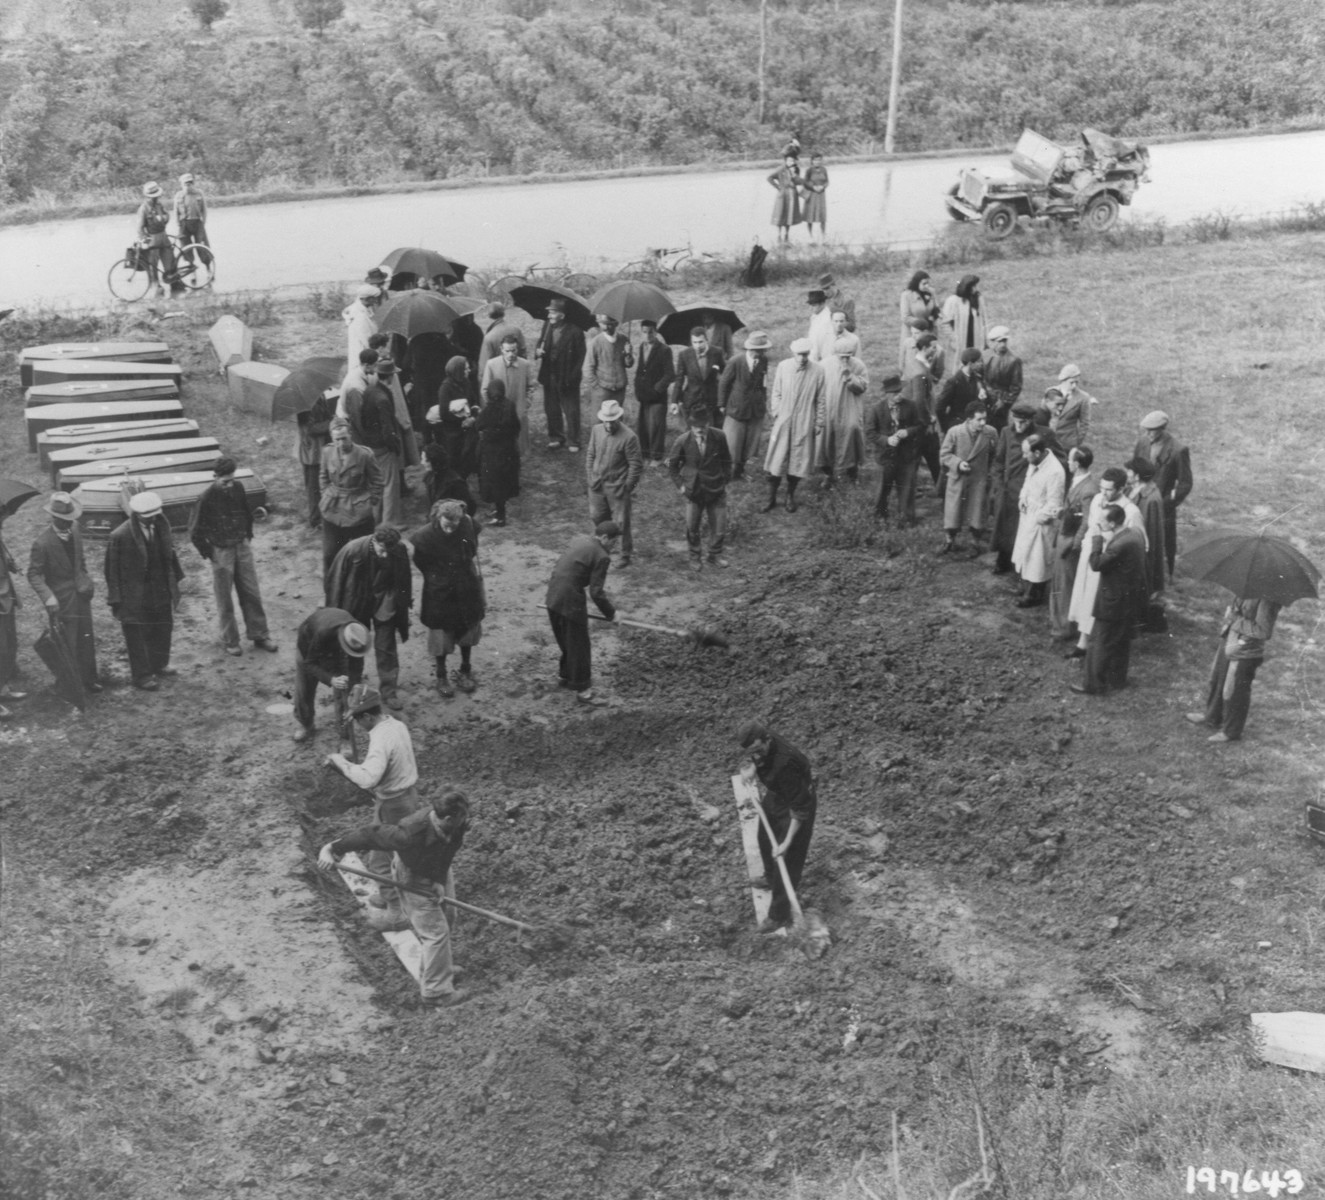 Italian civilians exhume a mass grave containing the bodies of 38 Italians shot by German forces.  

The victims were chosen at random and killed in reprisal for the murder of an Italian Fascist by partisans in August 1944.  A young Italian woman who protested the killings to the Germans was shot along with the other hostages.